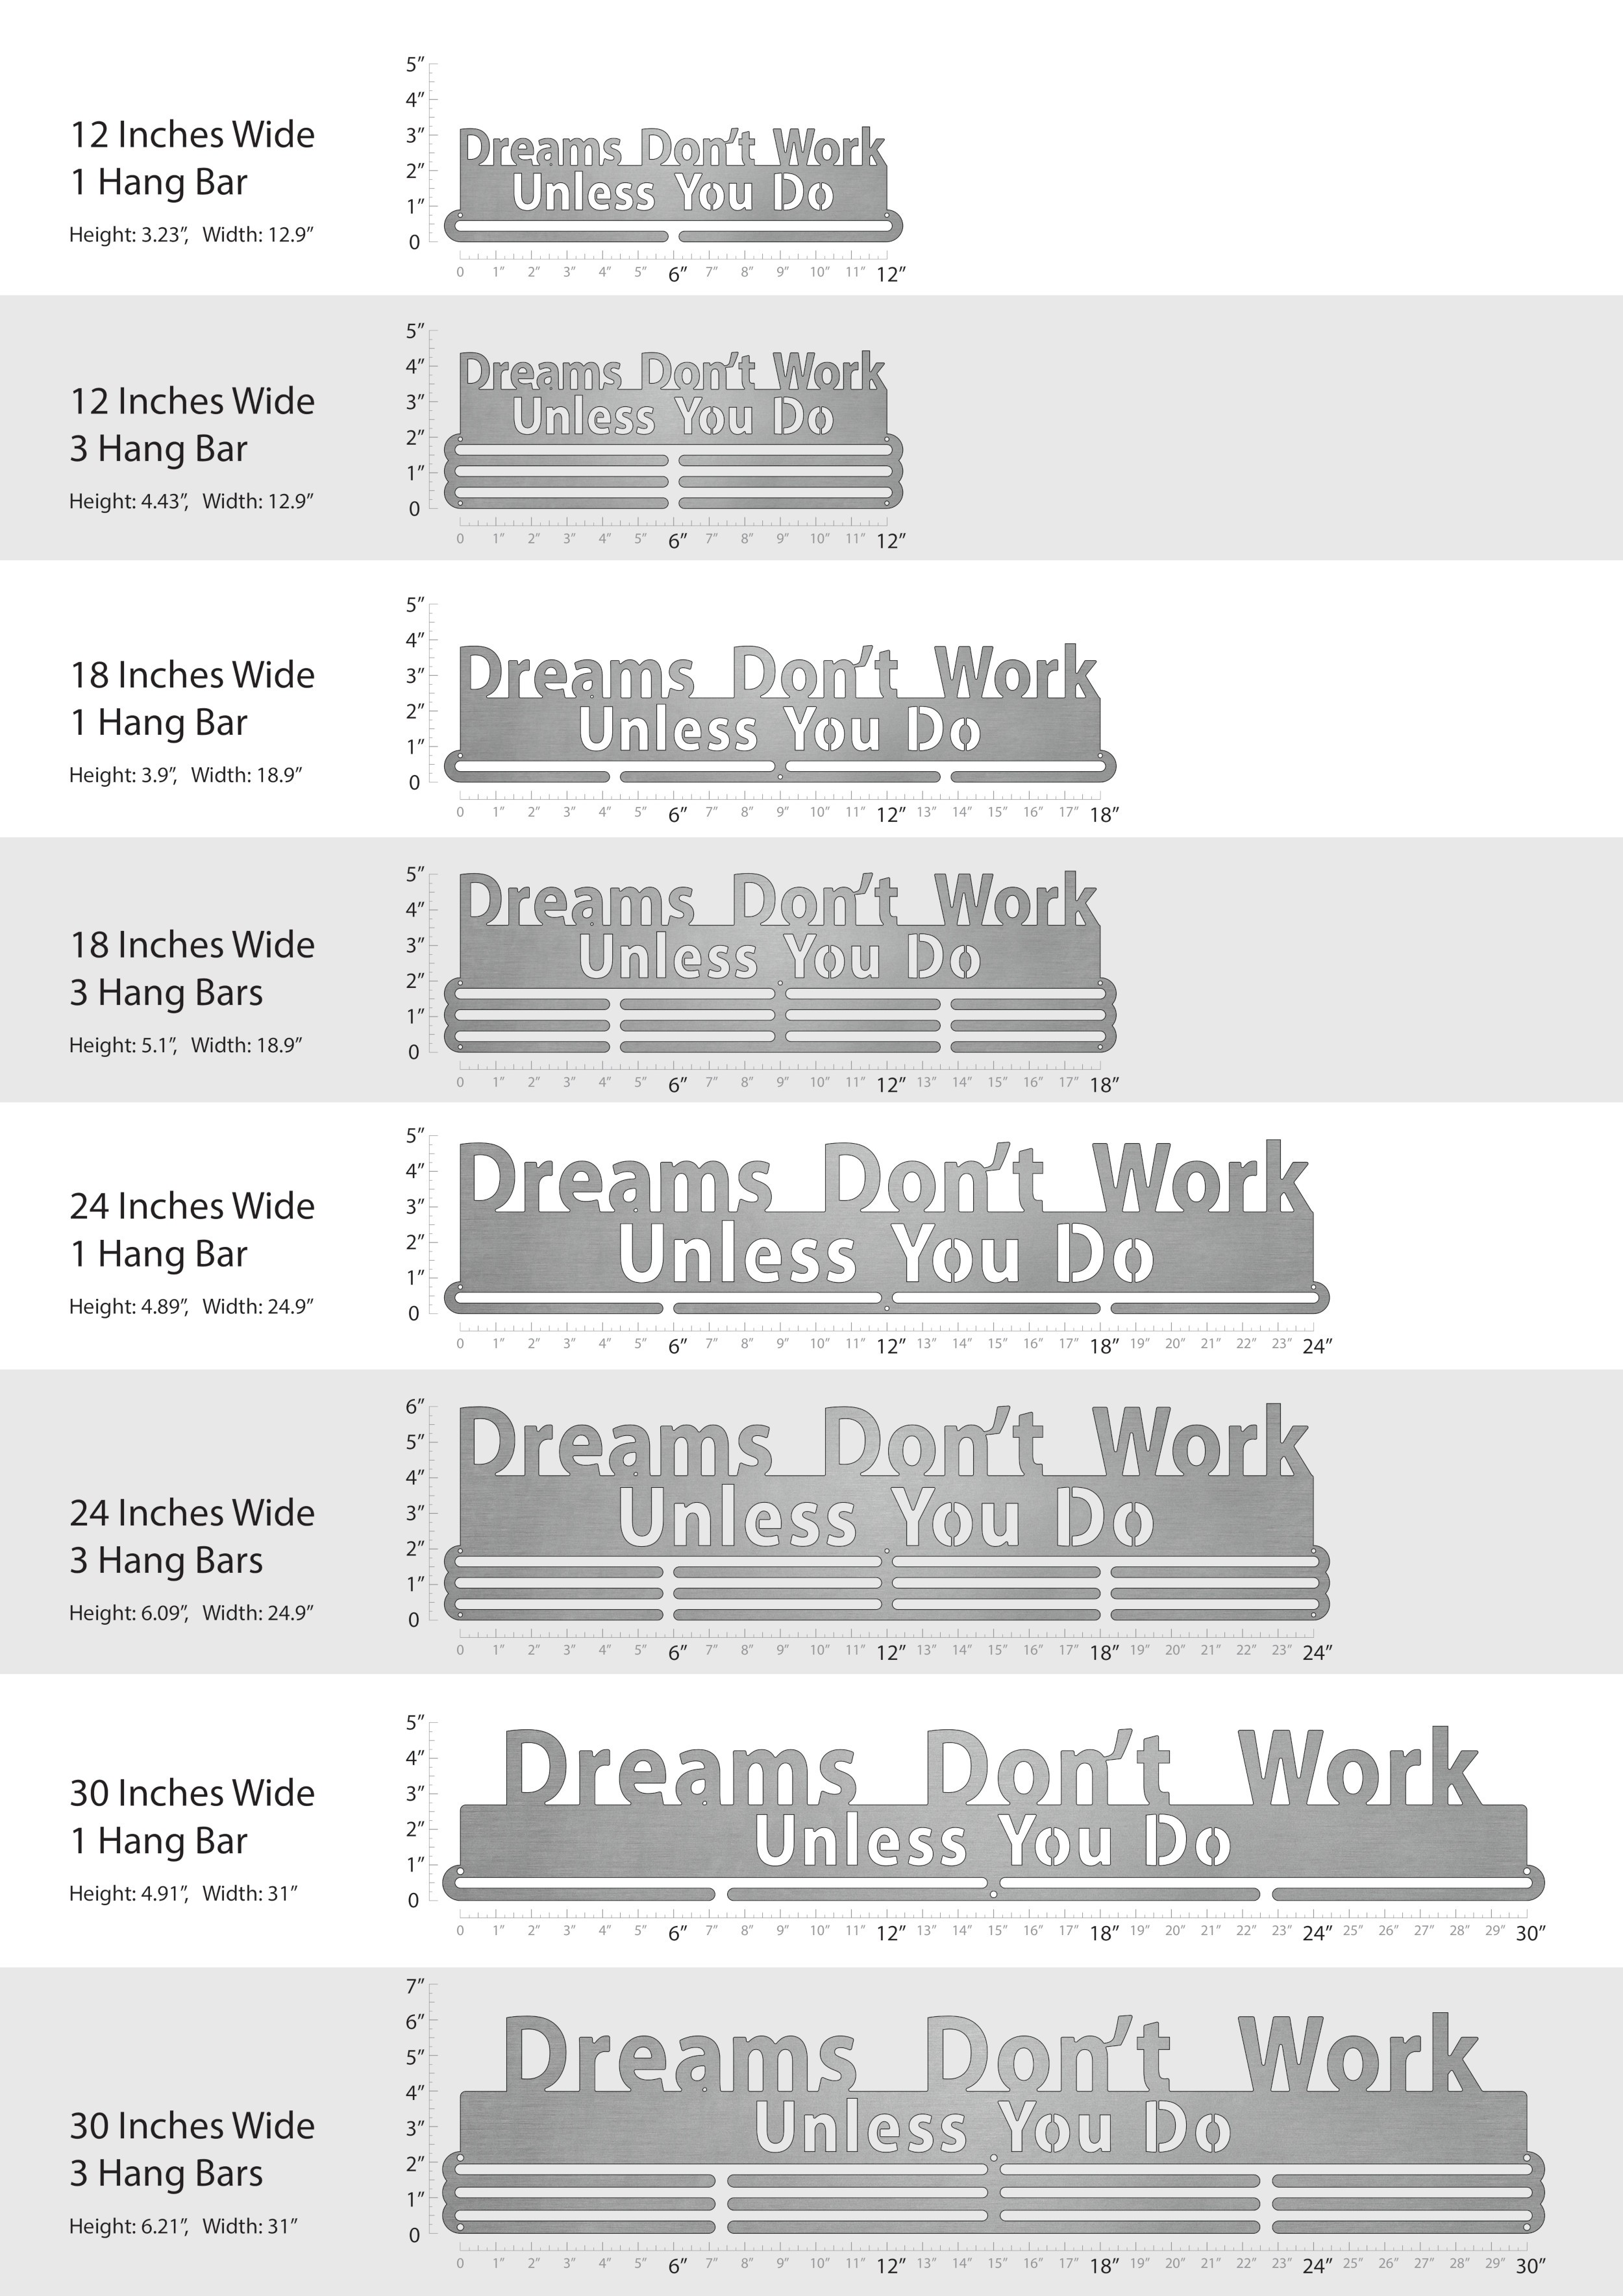 Dreams Don't Work Unless You Do 